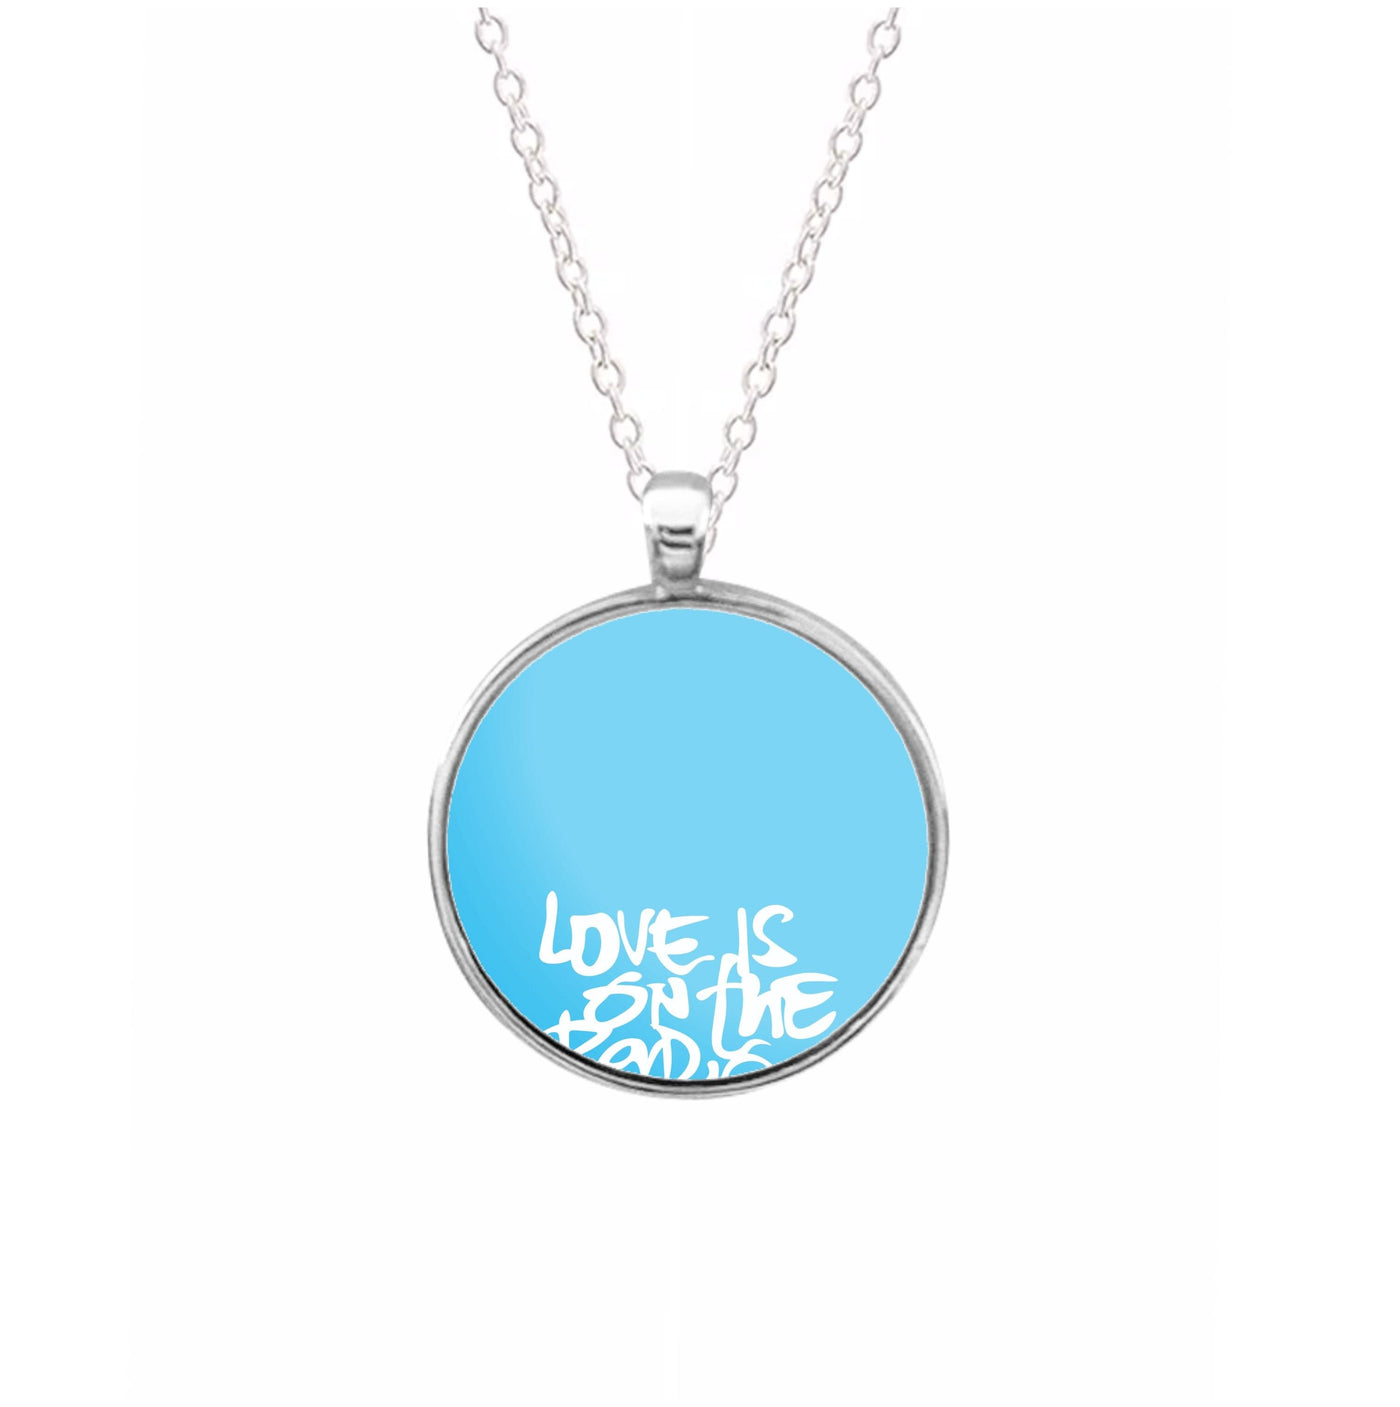 Love Is On The Radio - McFly Necklace